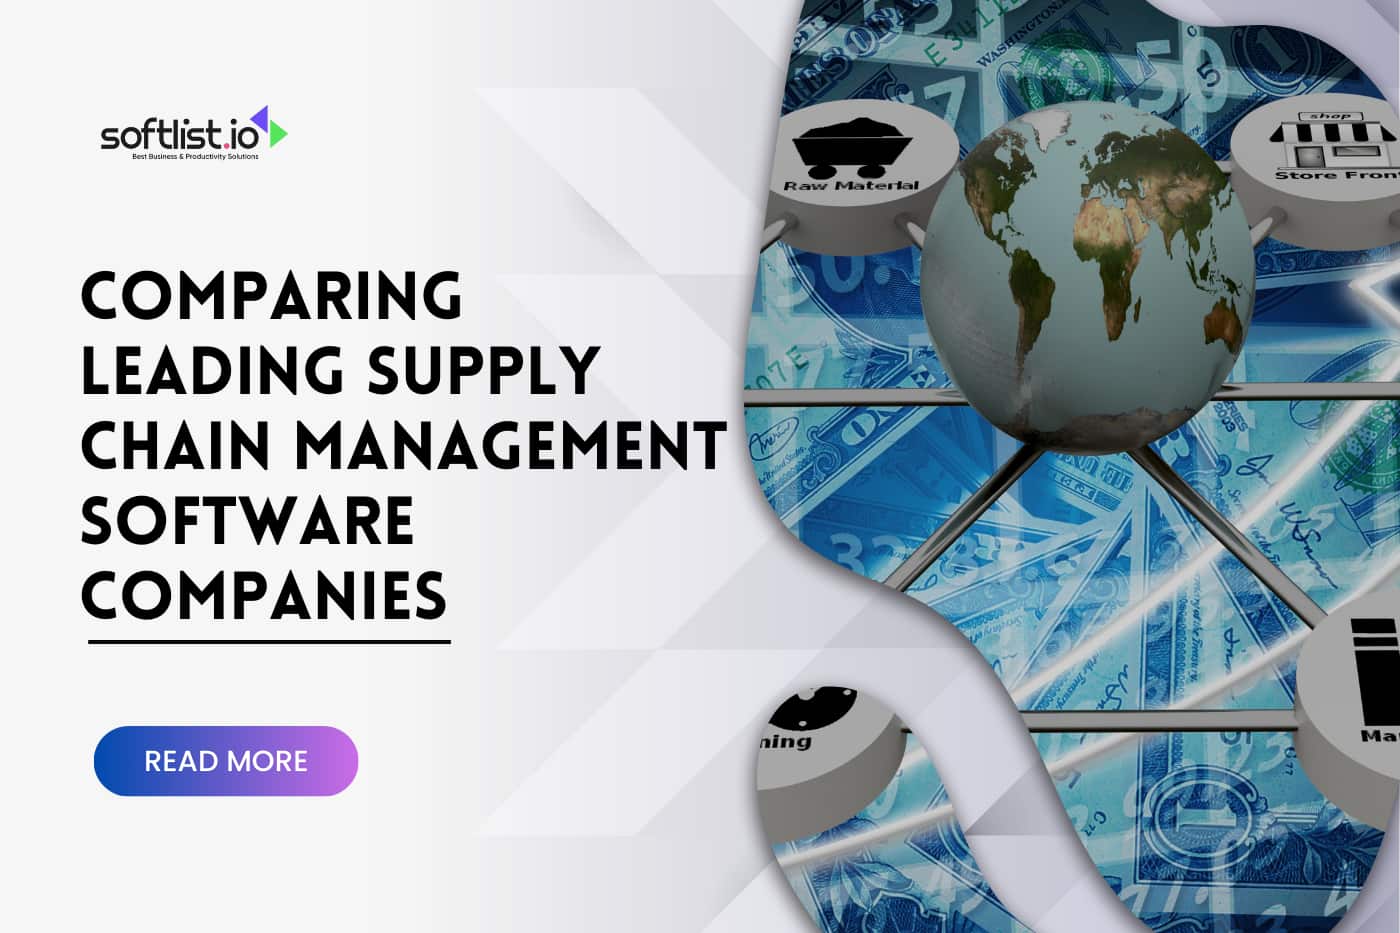 Comparing Leading Supply Chain Management Software Companies